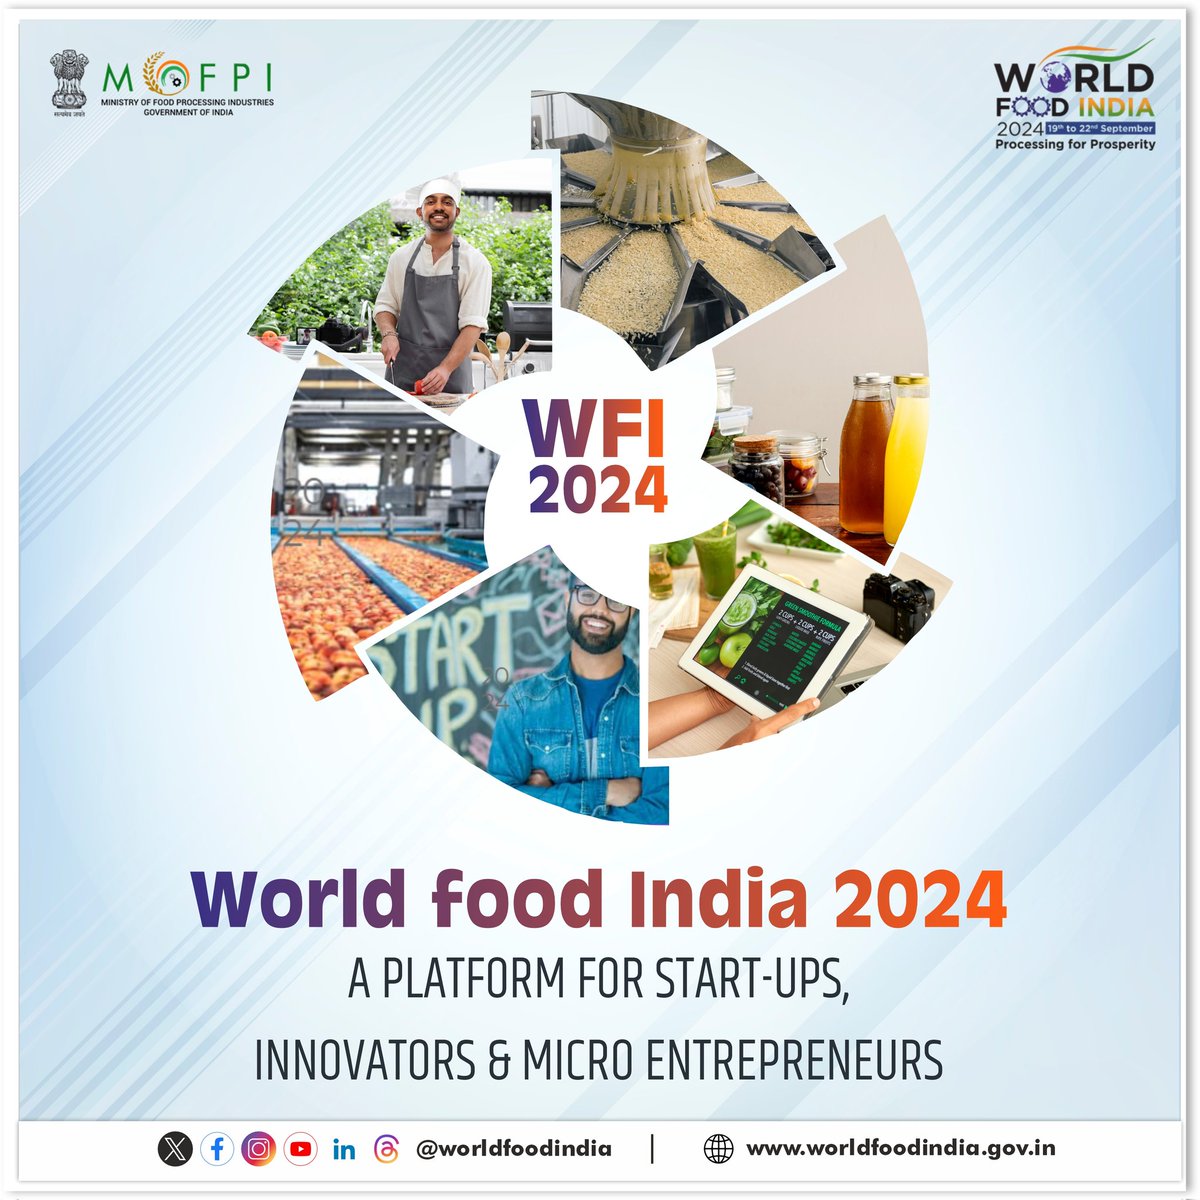 Get ready to showcase, connect & collaborate at world food india 2024. Join us for an unparalleled opportunity to explore India's food processing prowess. #𝐖𝐨𝐫𝐥𝐝𝐅𝐨𝐨𝐝𝐈𝐧𝐝𝐢𝐚𝟐𝟎𝟐𝟒. @MOFPI_GOI @ficci_india @investindia @mygovindia @MyGovHindi